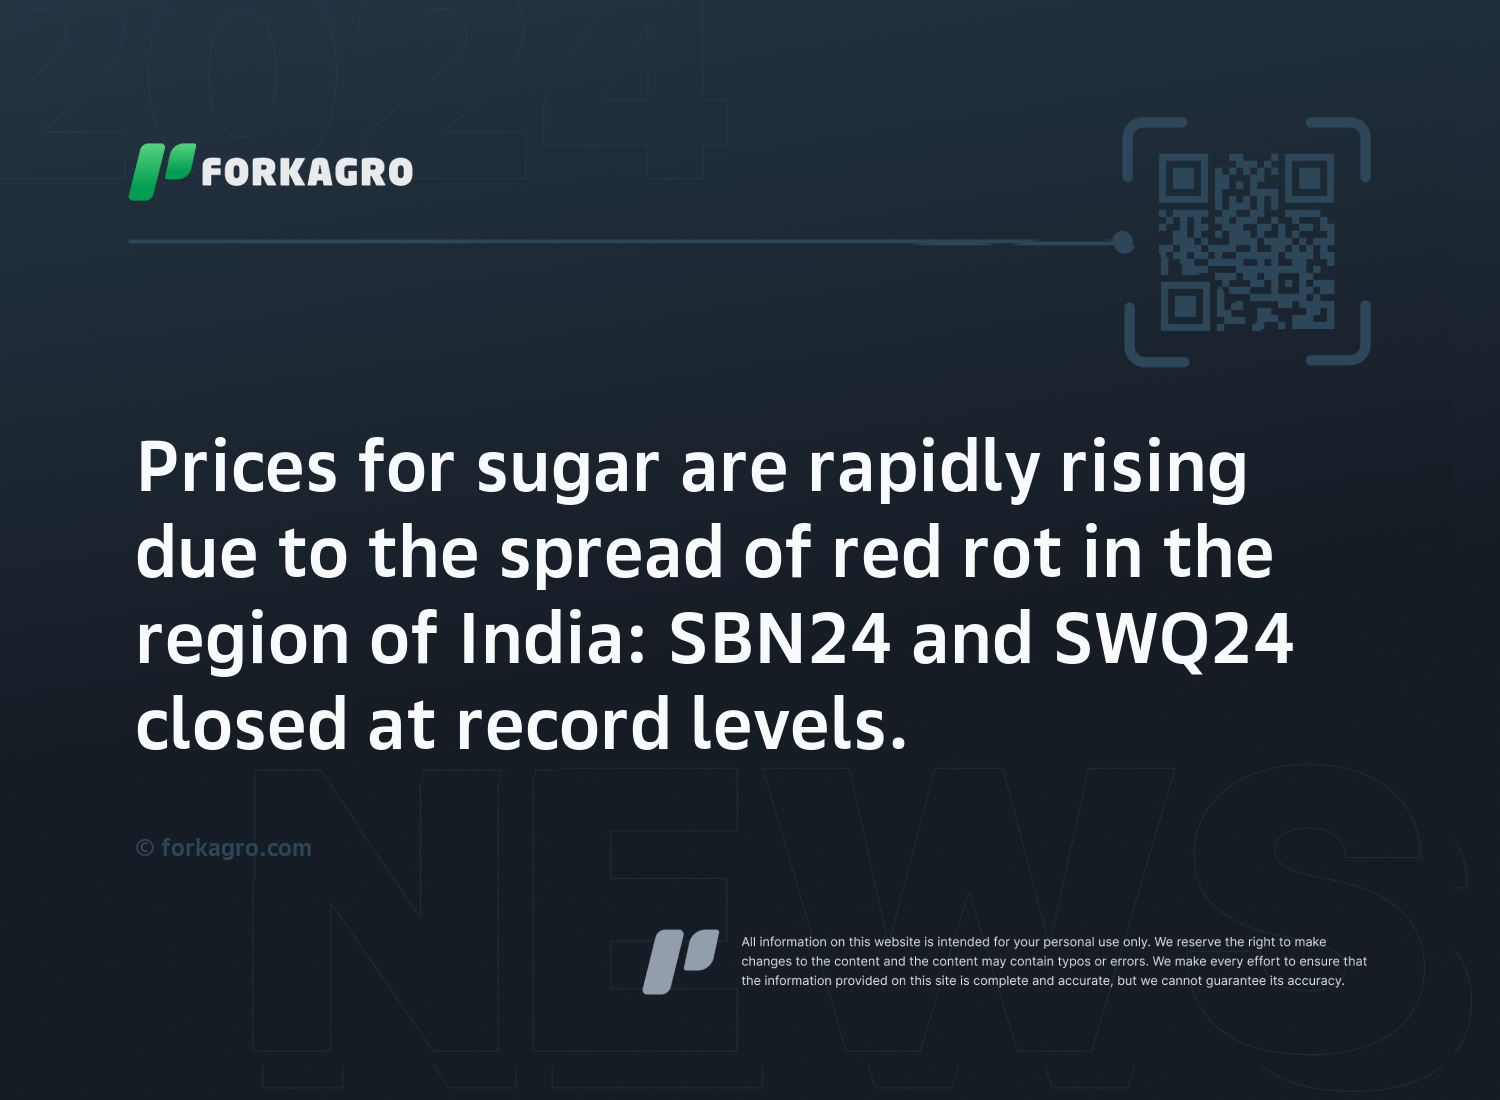 Prices for sugar are rapidly rising due to the spread of red rot in the region of India: SBN24 and SWQ24 closed at record levels.